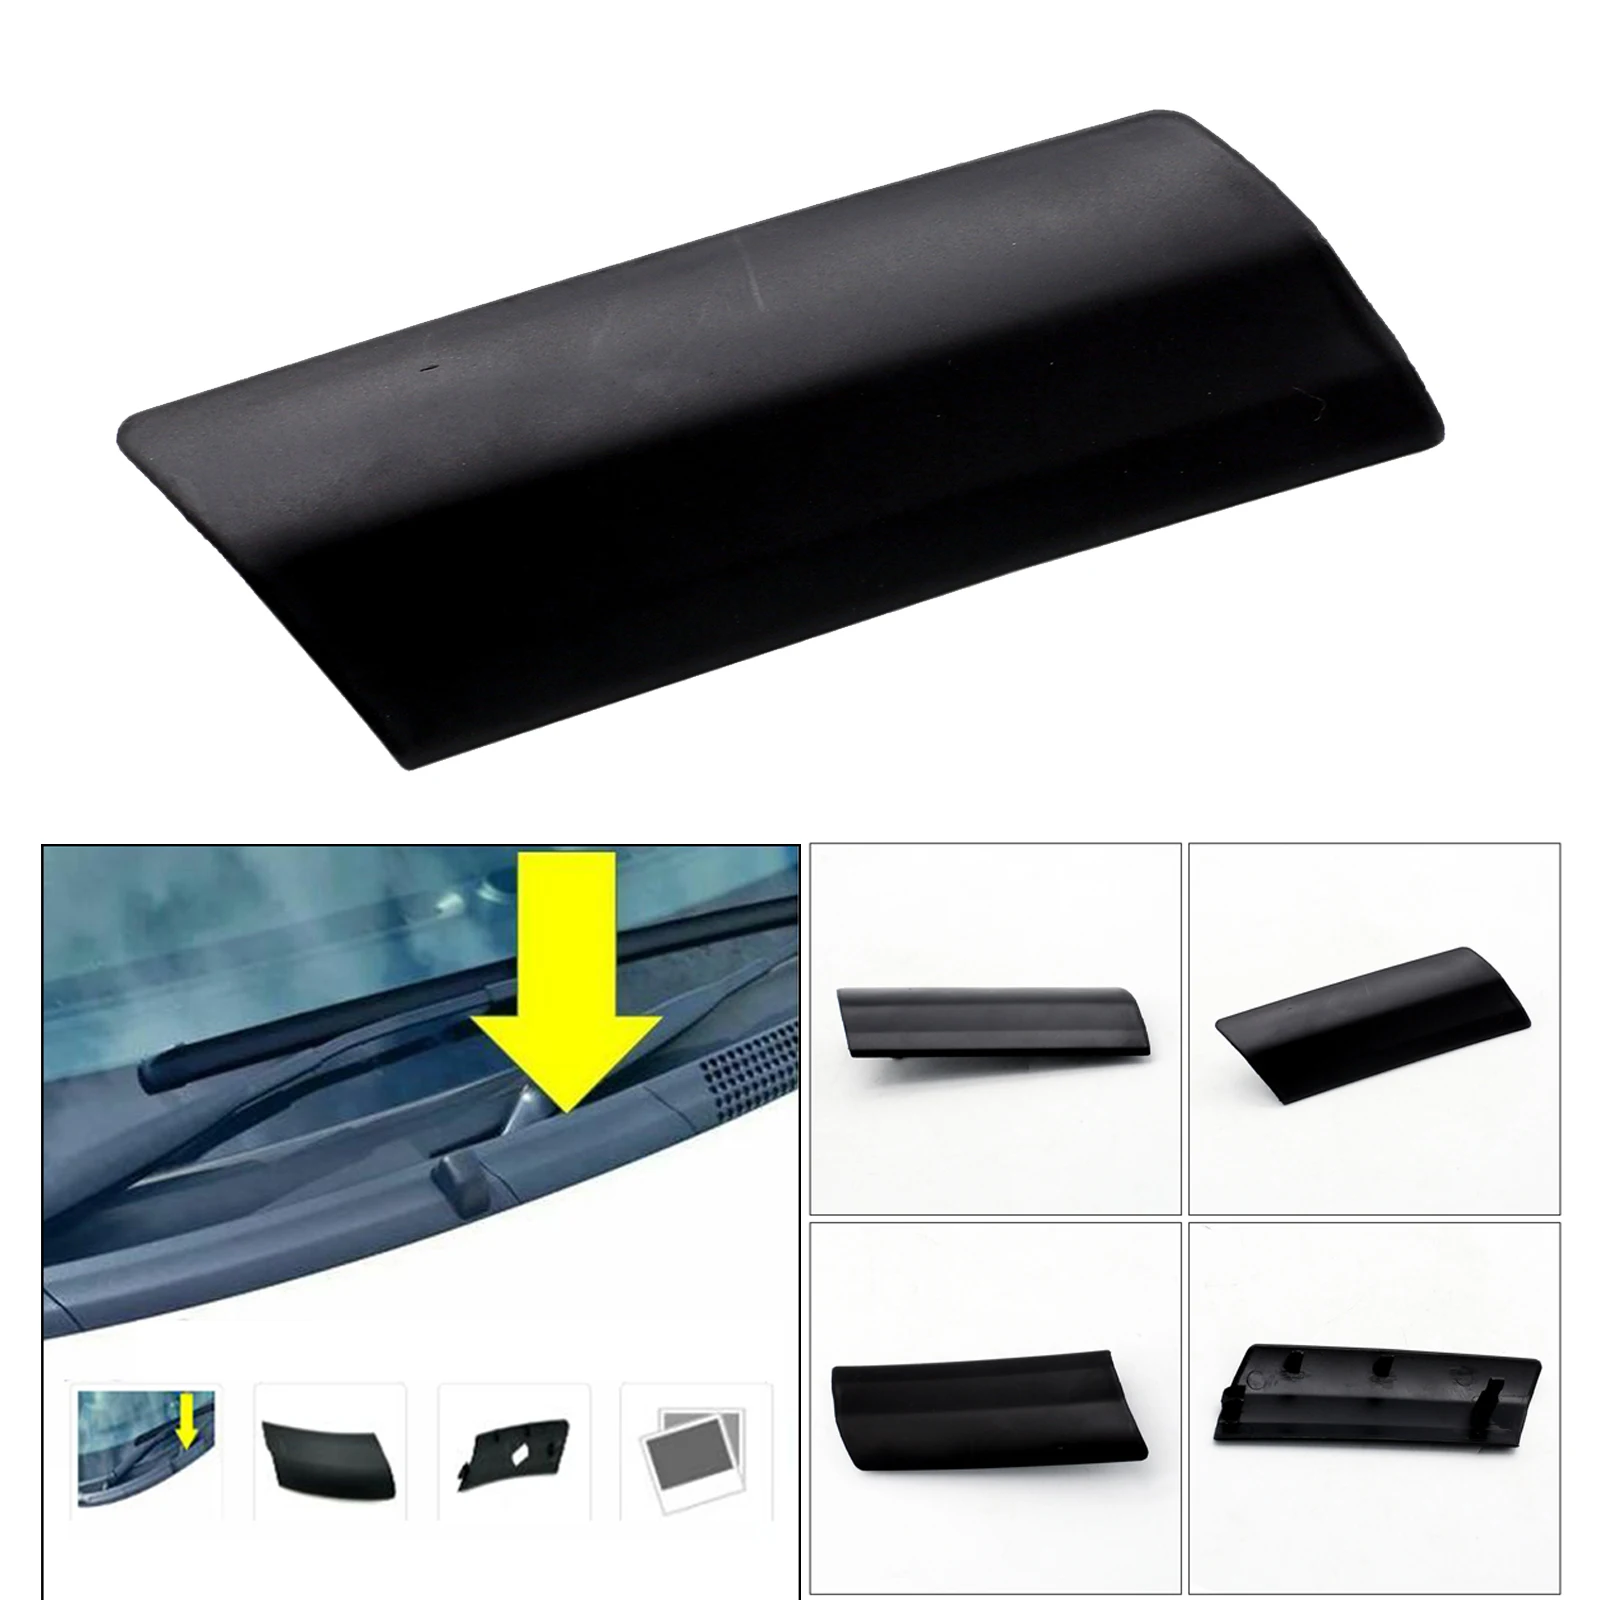 Auto Wiper Scuttle Panel Trim Protective Cover Left 735452714 for Fiat 500 ,Easy Install